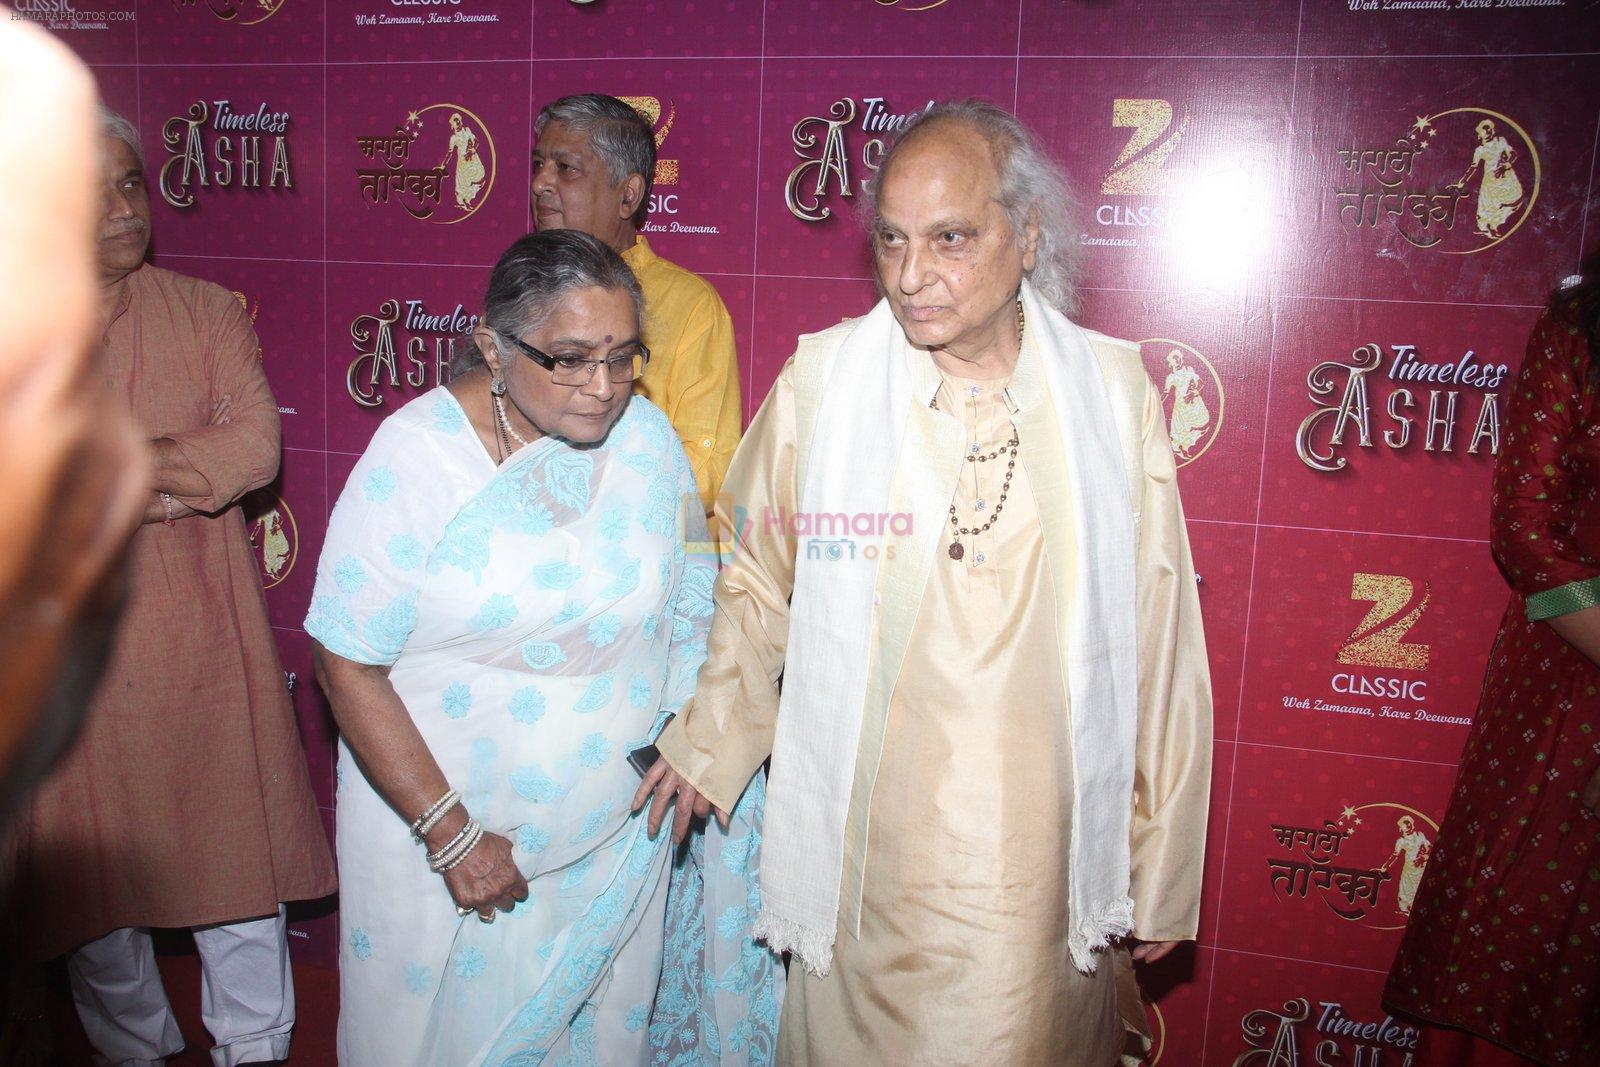 Pandit Jasraj during the musical concert Timless Asha organised by Zee Classsic on occasion of Bollywood singer Asha Bhosle 83rd birthday in Mumbai, India on September 8, 2016